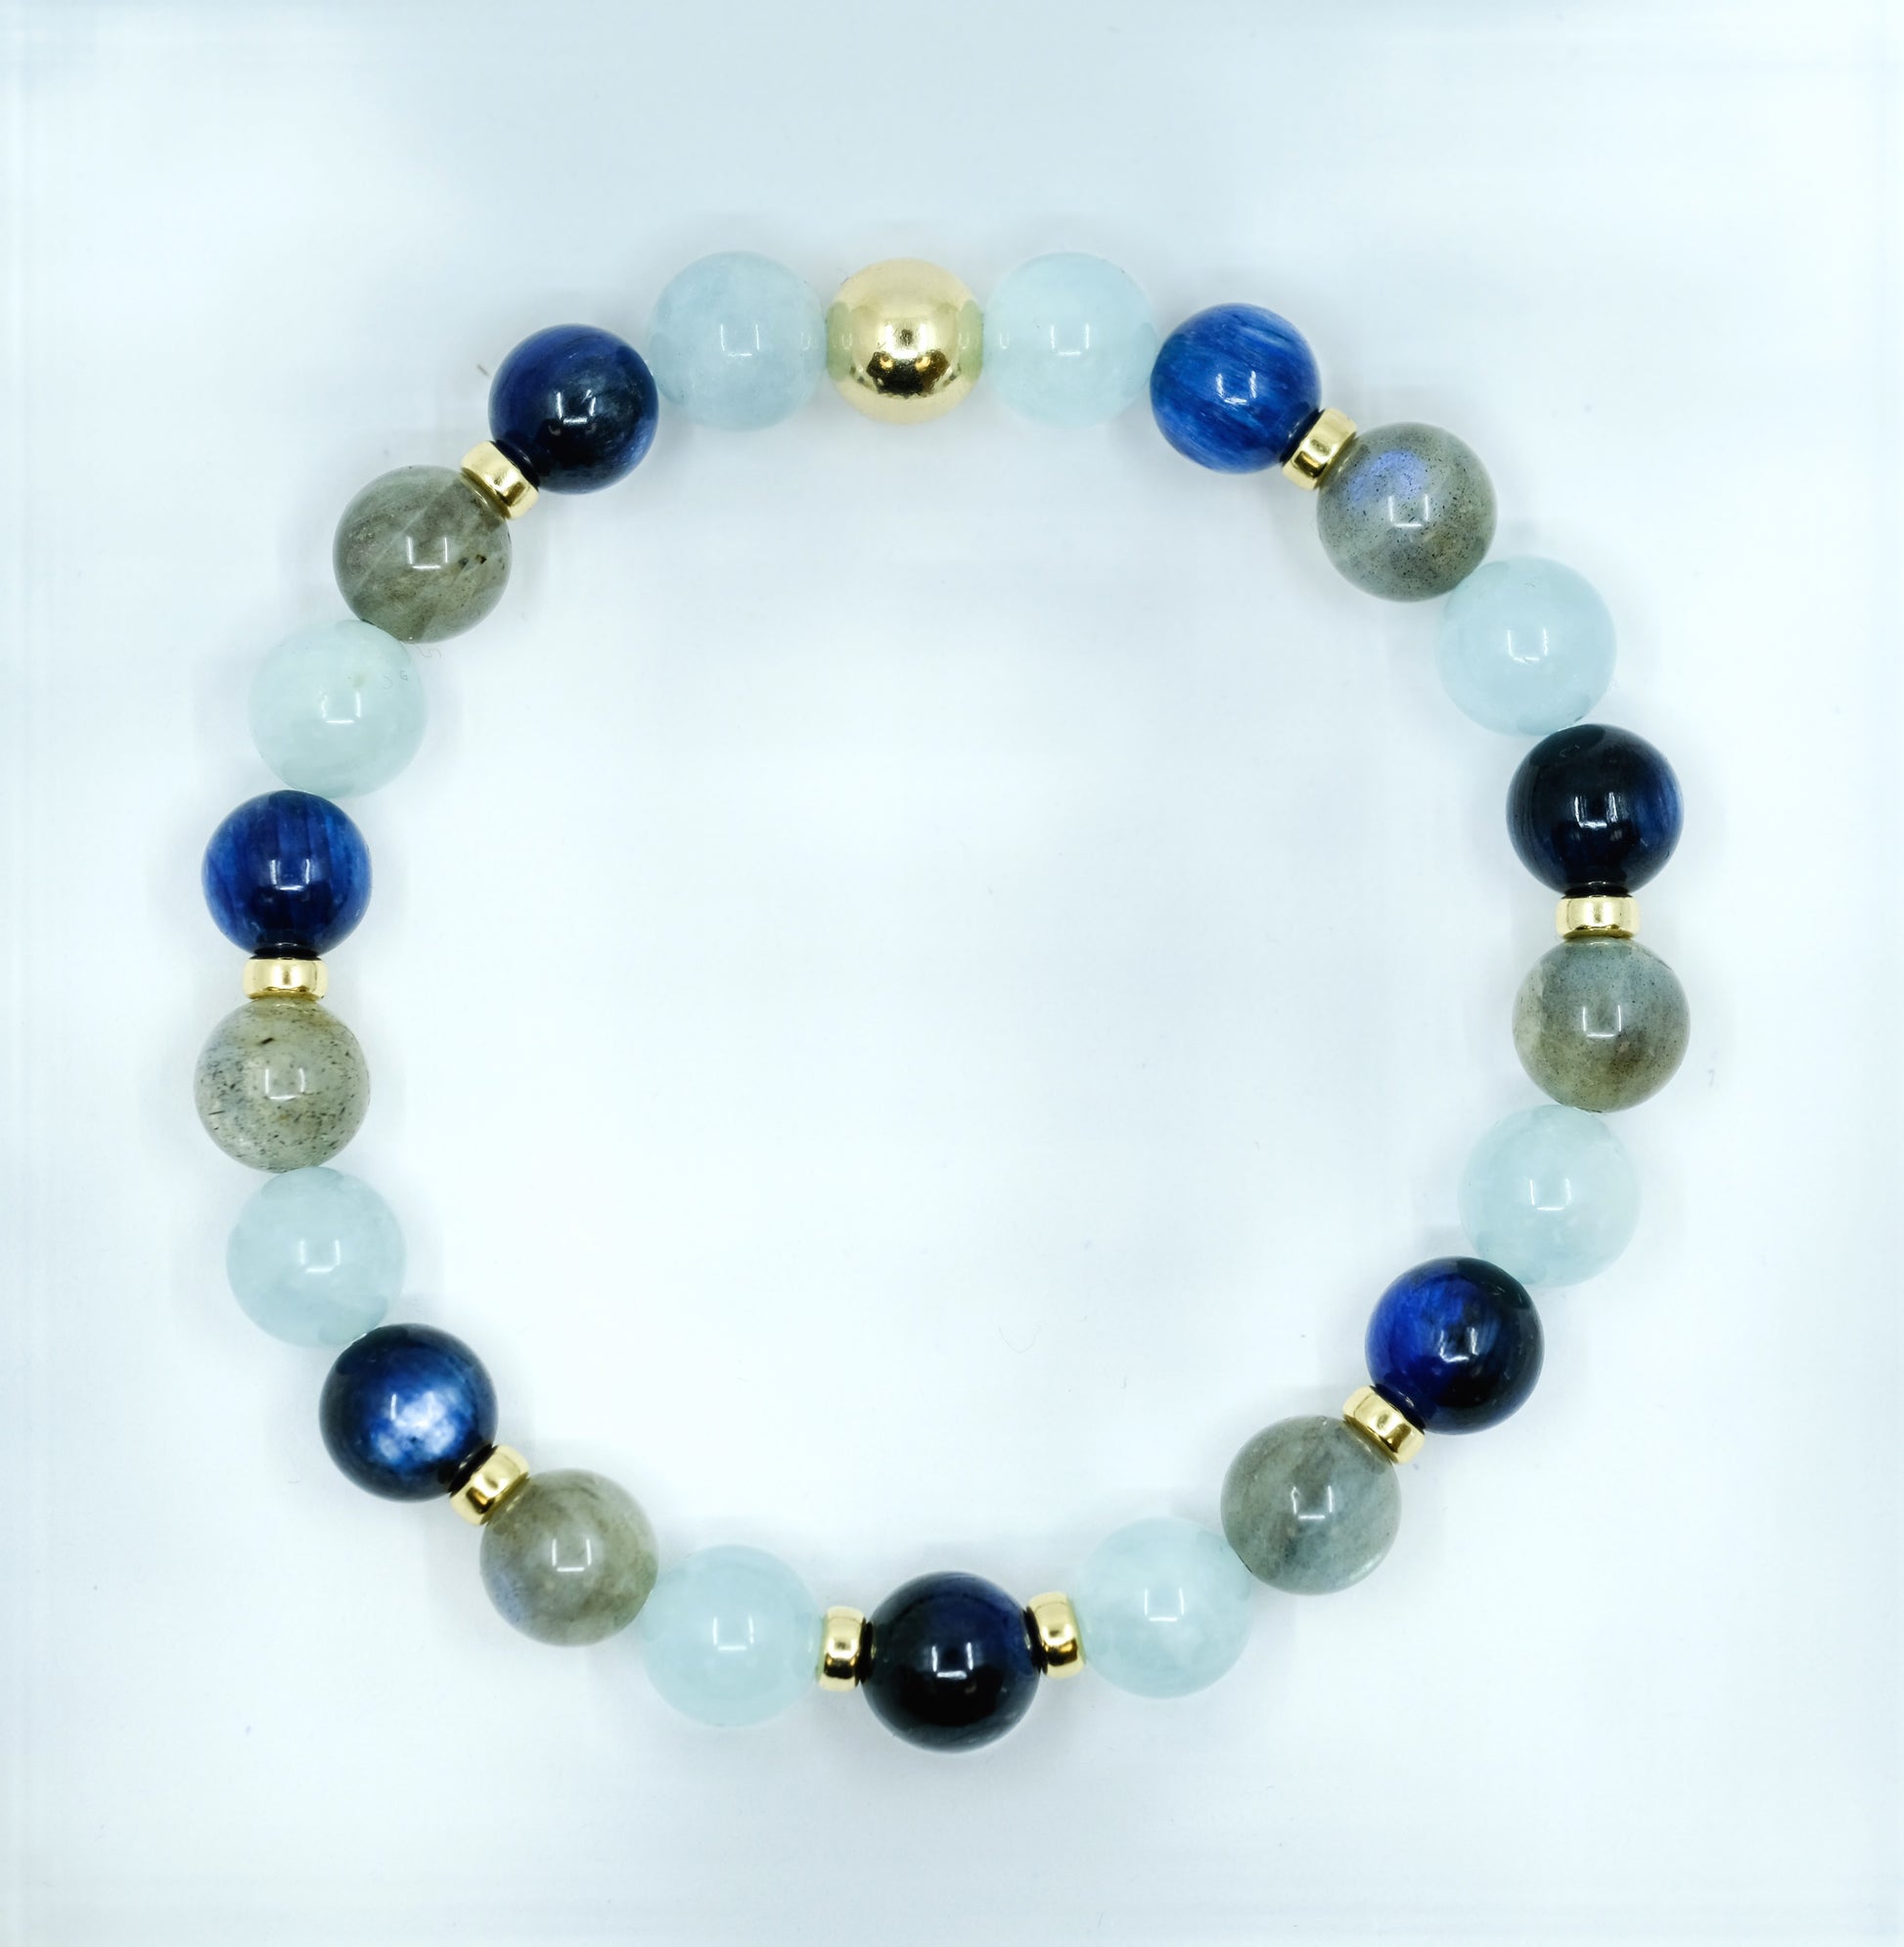 A Kyanite, Aquamarine and Labradorite gemstone bracelet with gold accessories from above